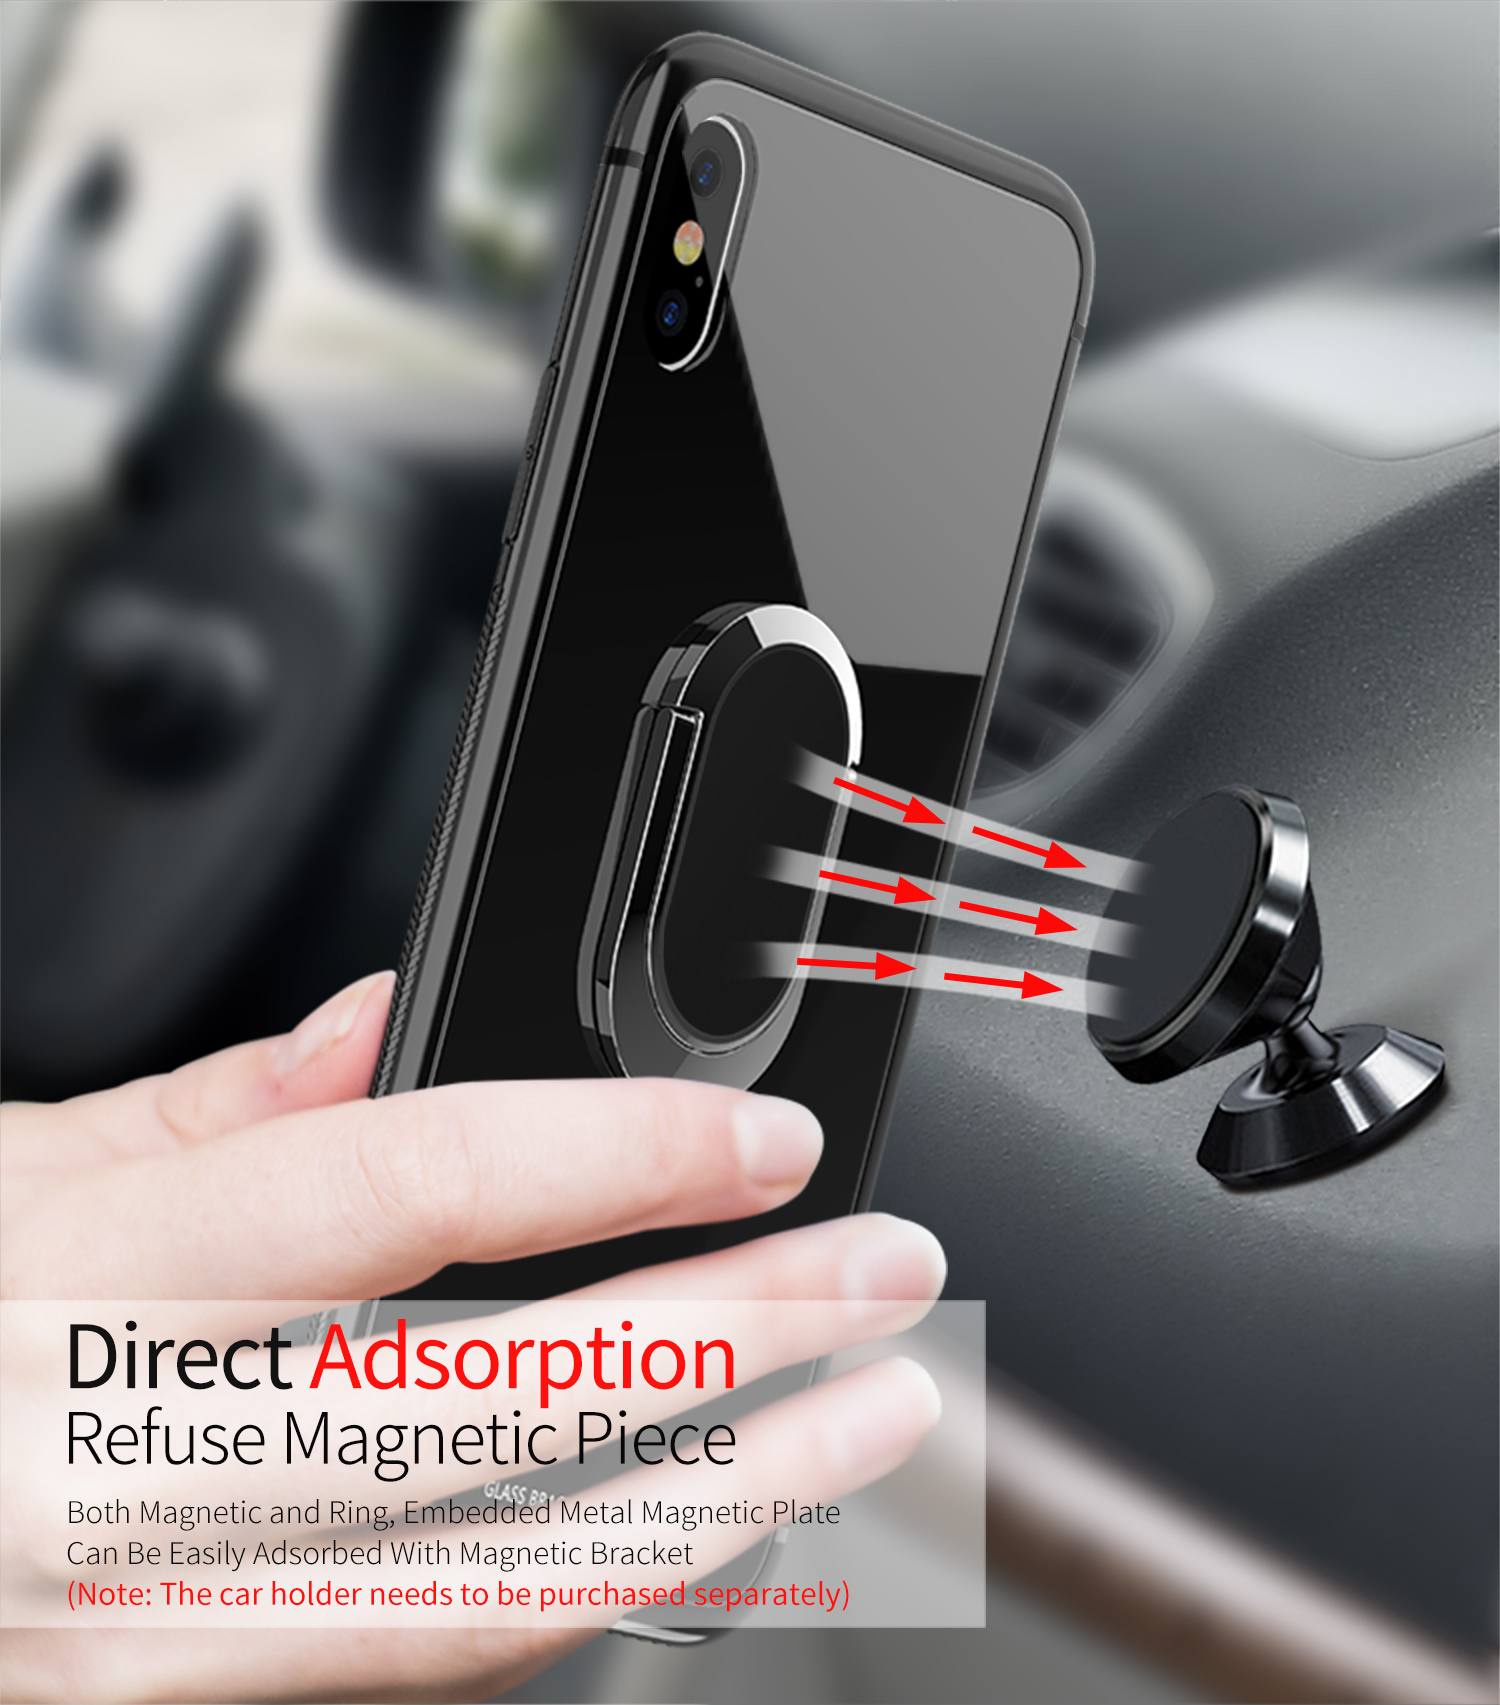 Bakeey-360deg-Rotation-Ring-Kickstand-Magnetic-Glass-Protective-Case-for-iPhone-X-1320685-2